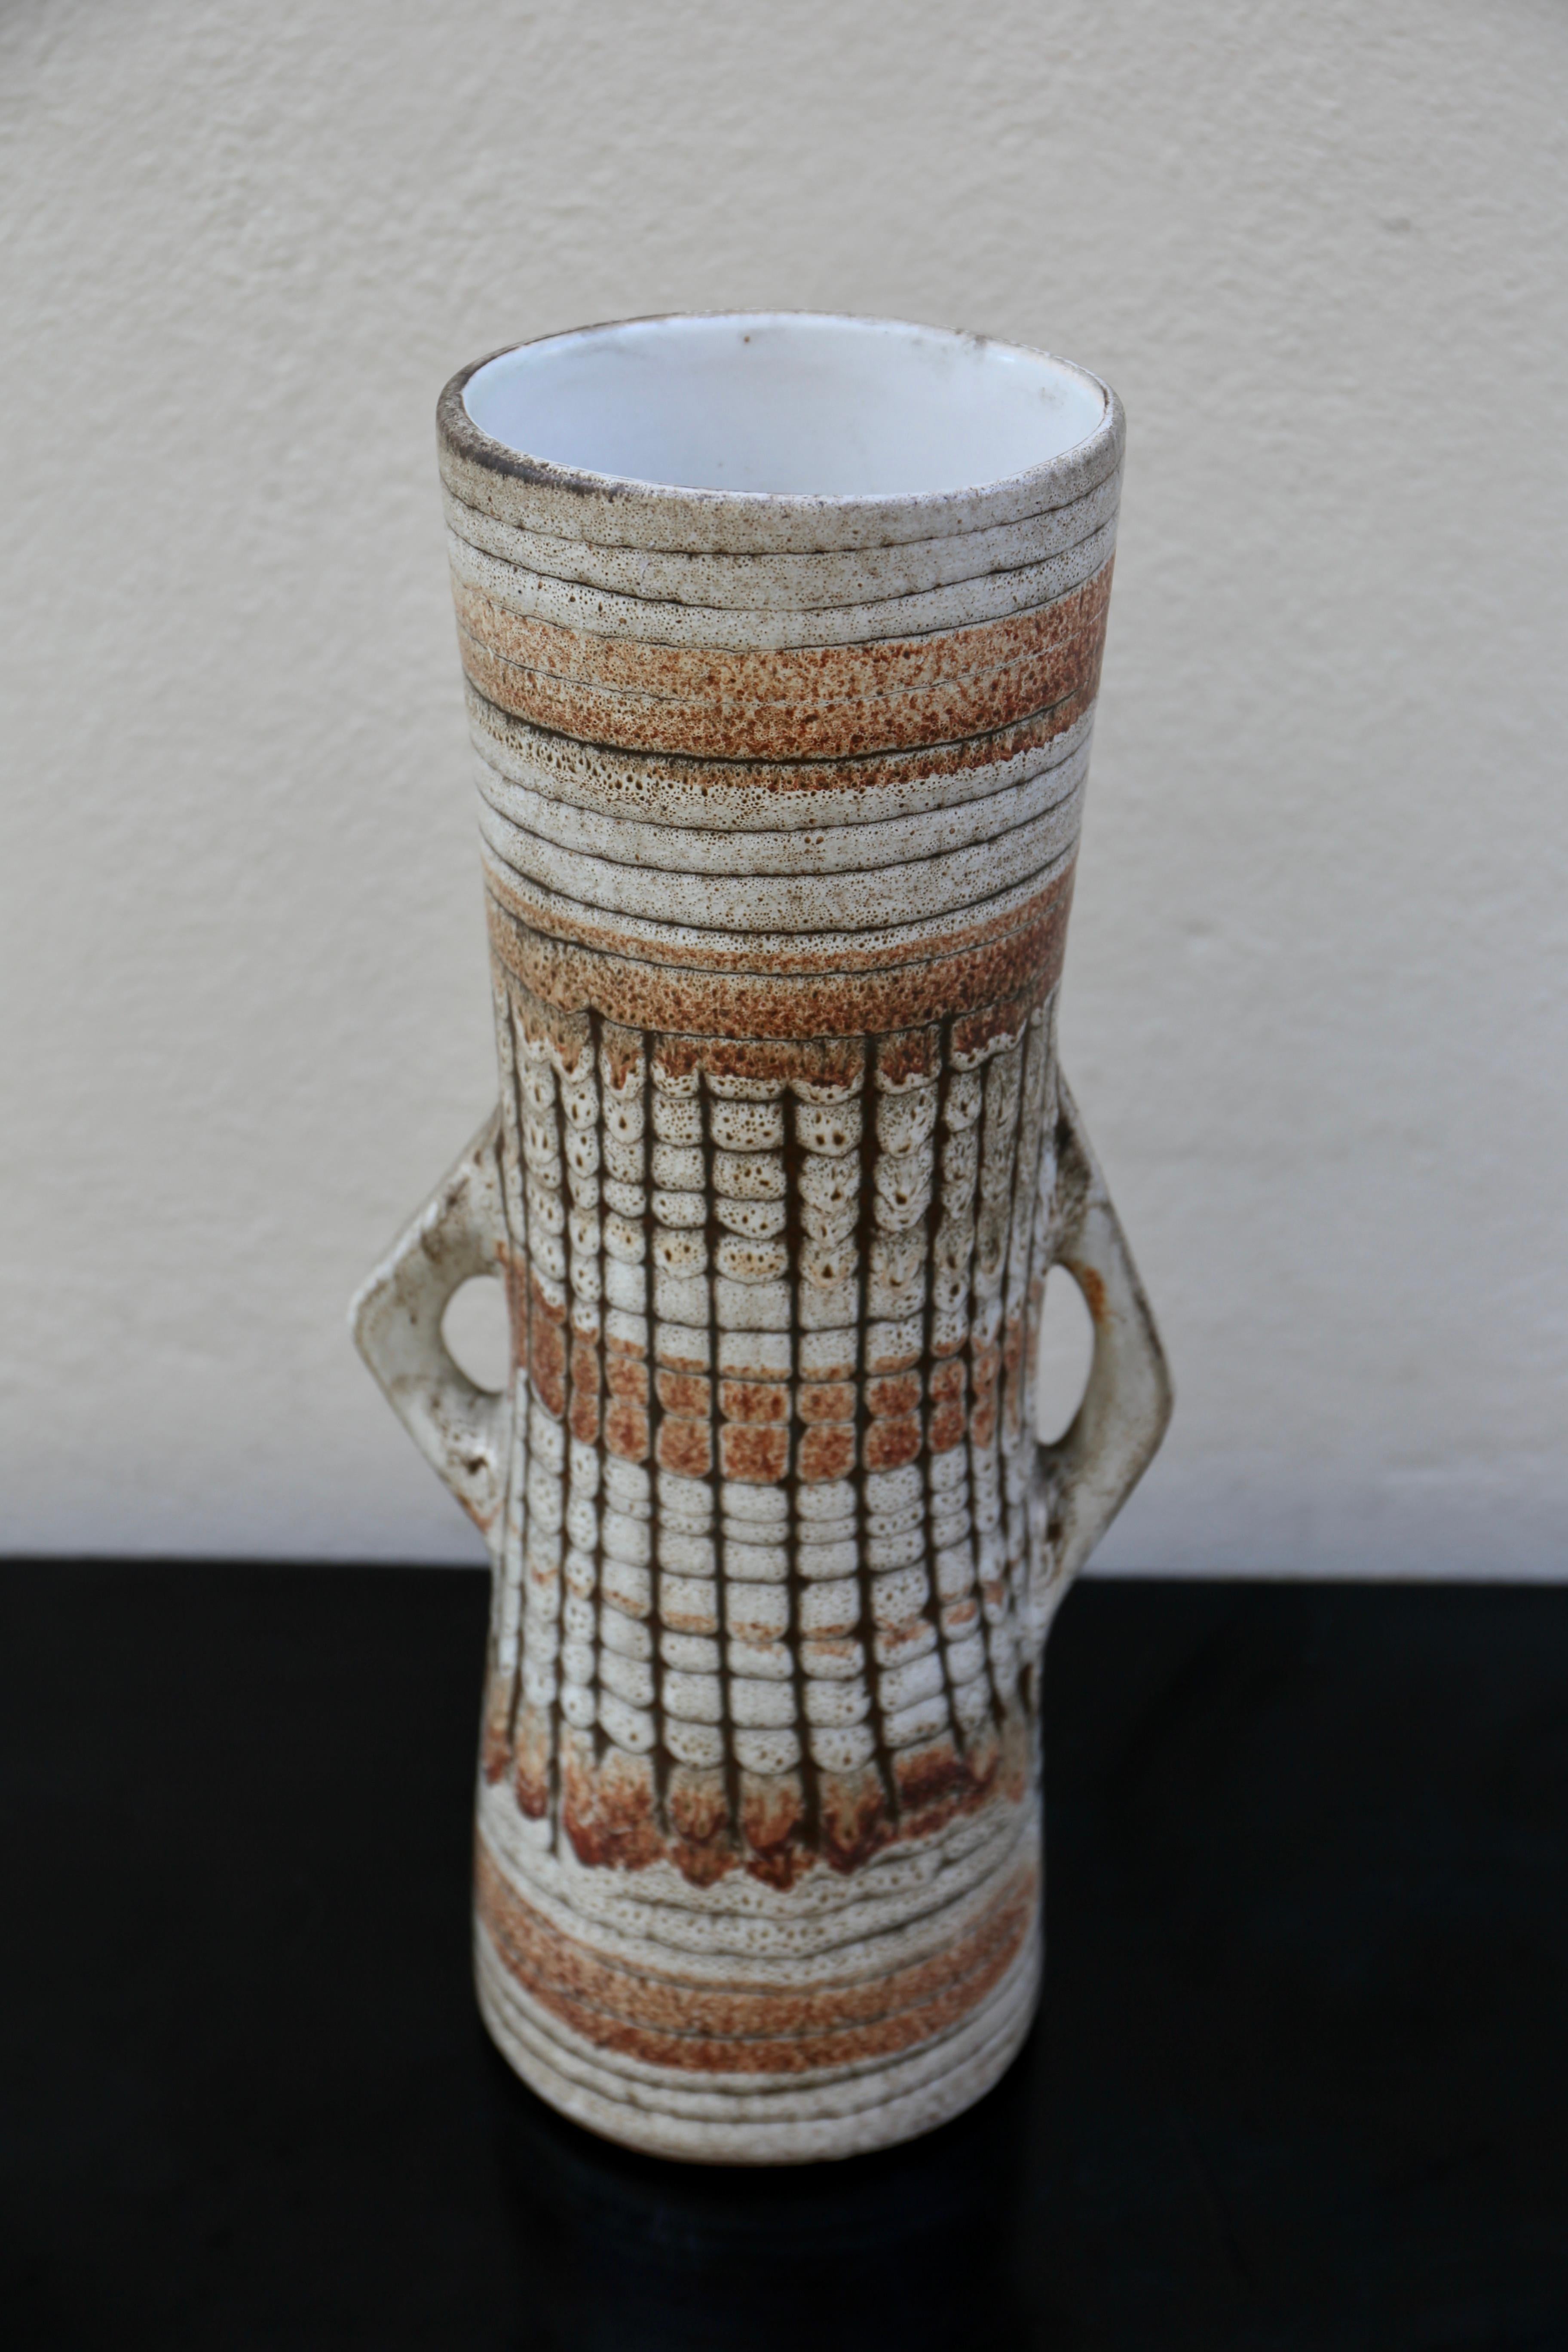 This impressive ceramic vase dates to the mid century.Loosely brushed characters decorate the shoulders and sides, painted in warm browns atop a creme-white slip base.The large vase has only become more beautiful with age, a testament to the